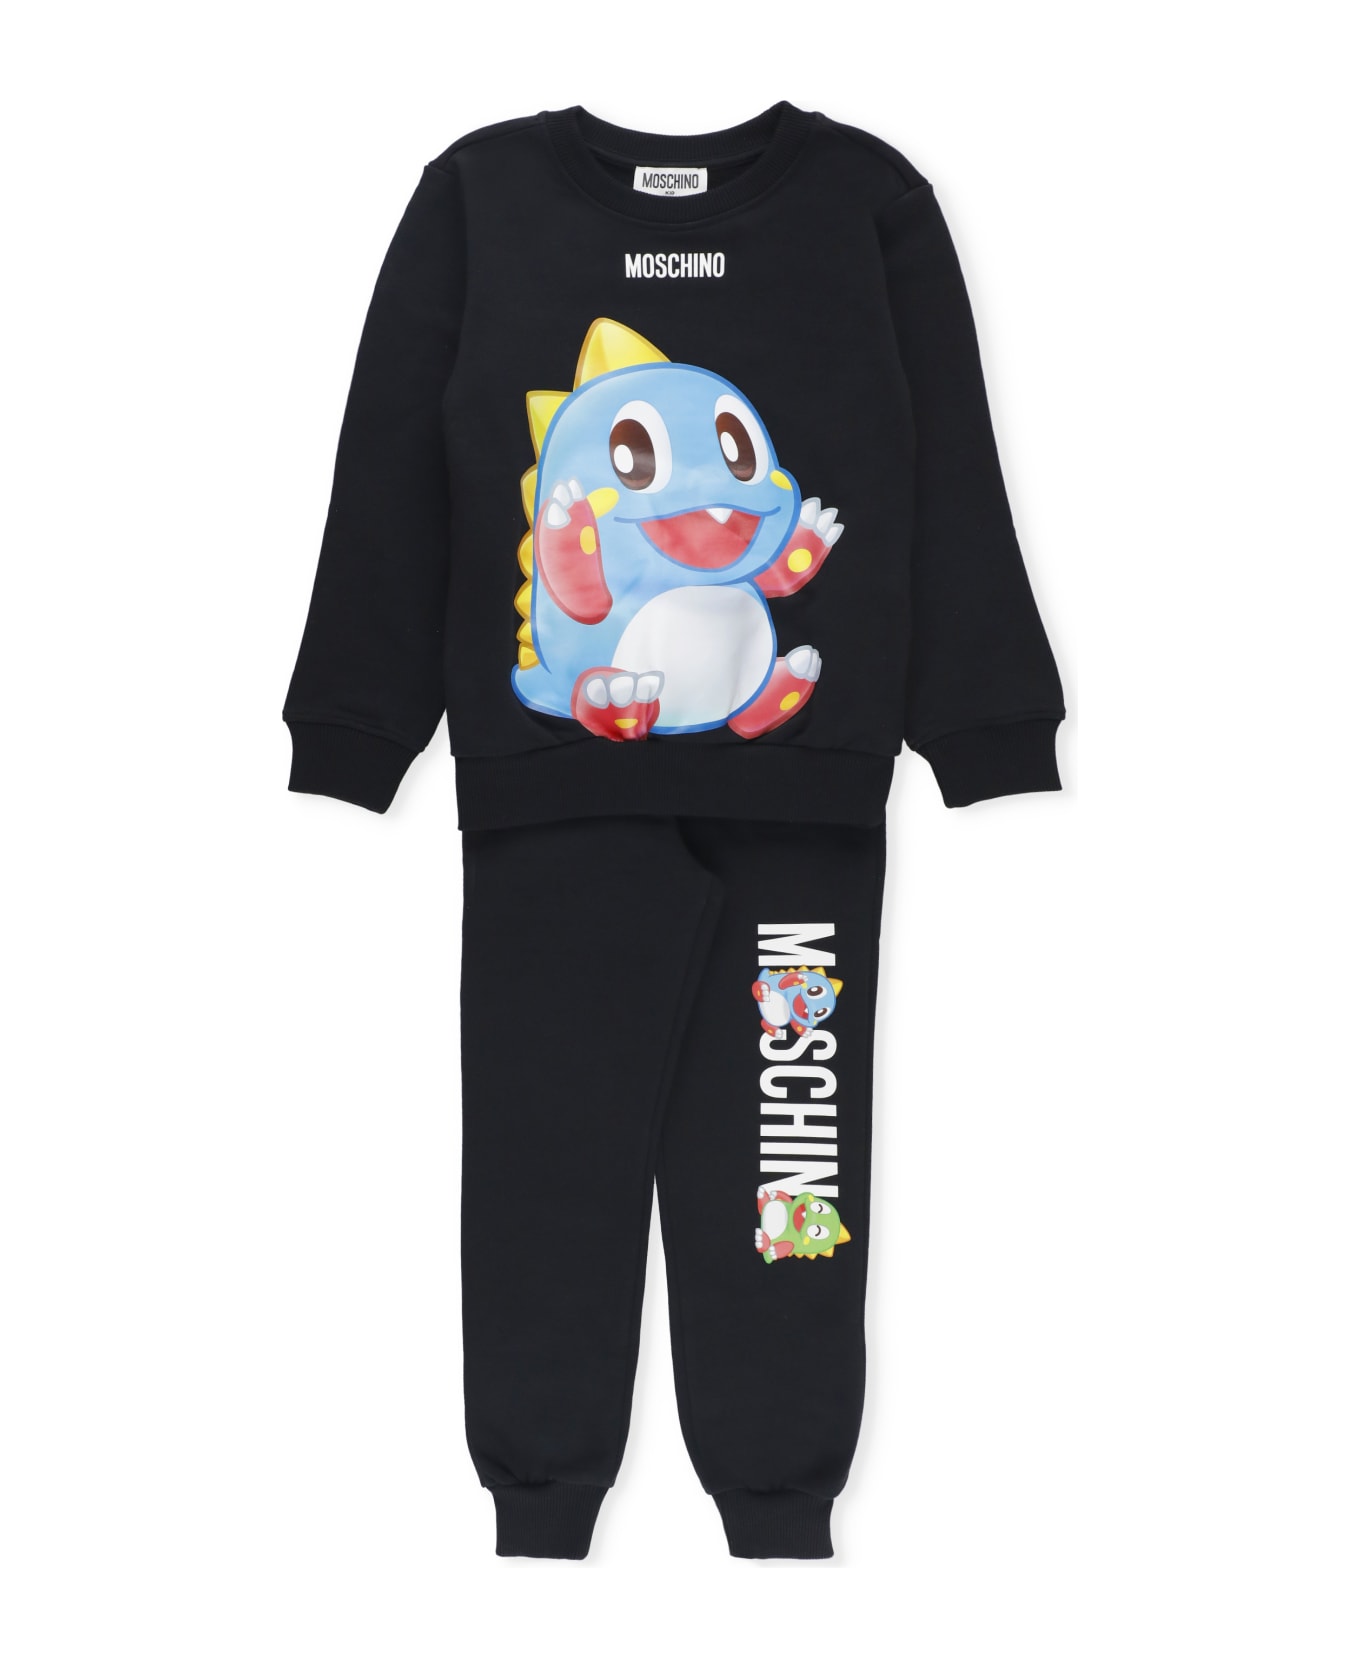 Moschino Chinese New Year Two Piece Suit - Black スーツ